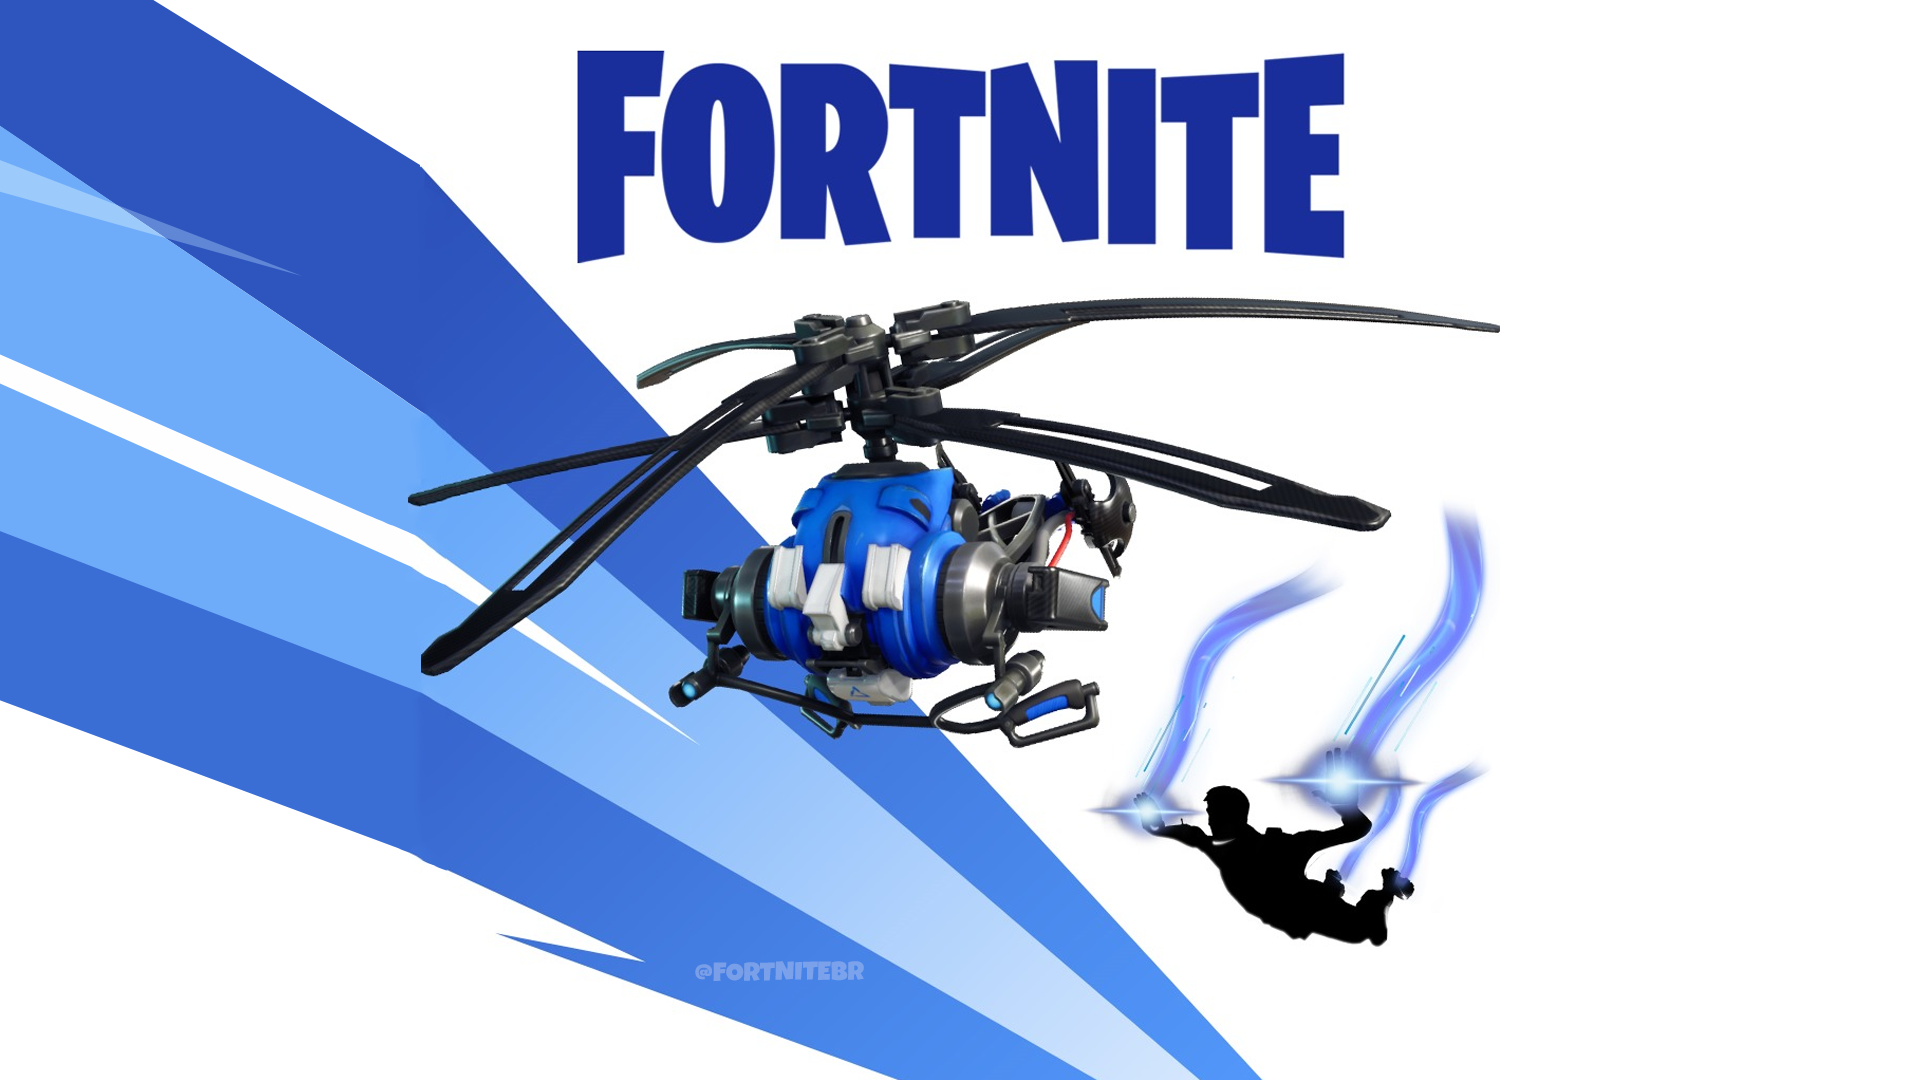 new playstation fortnite pack